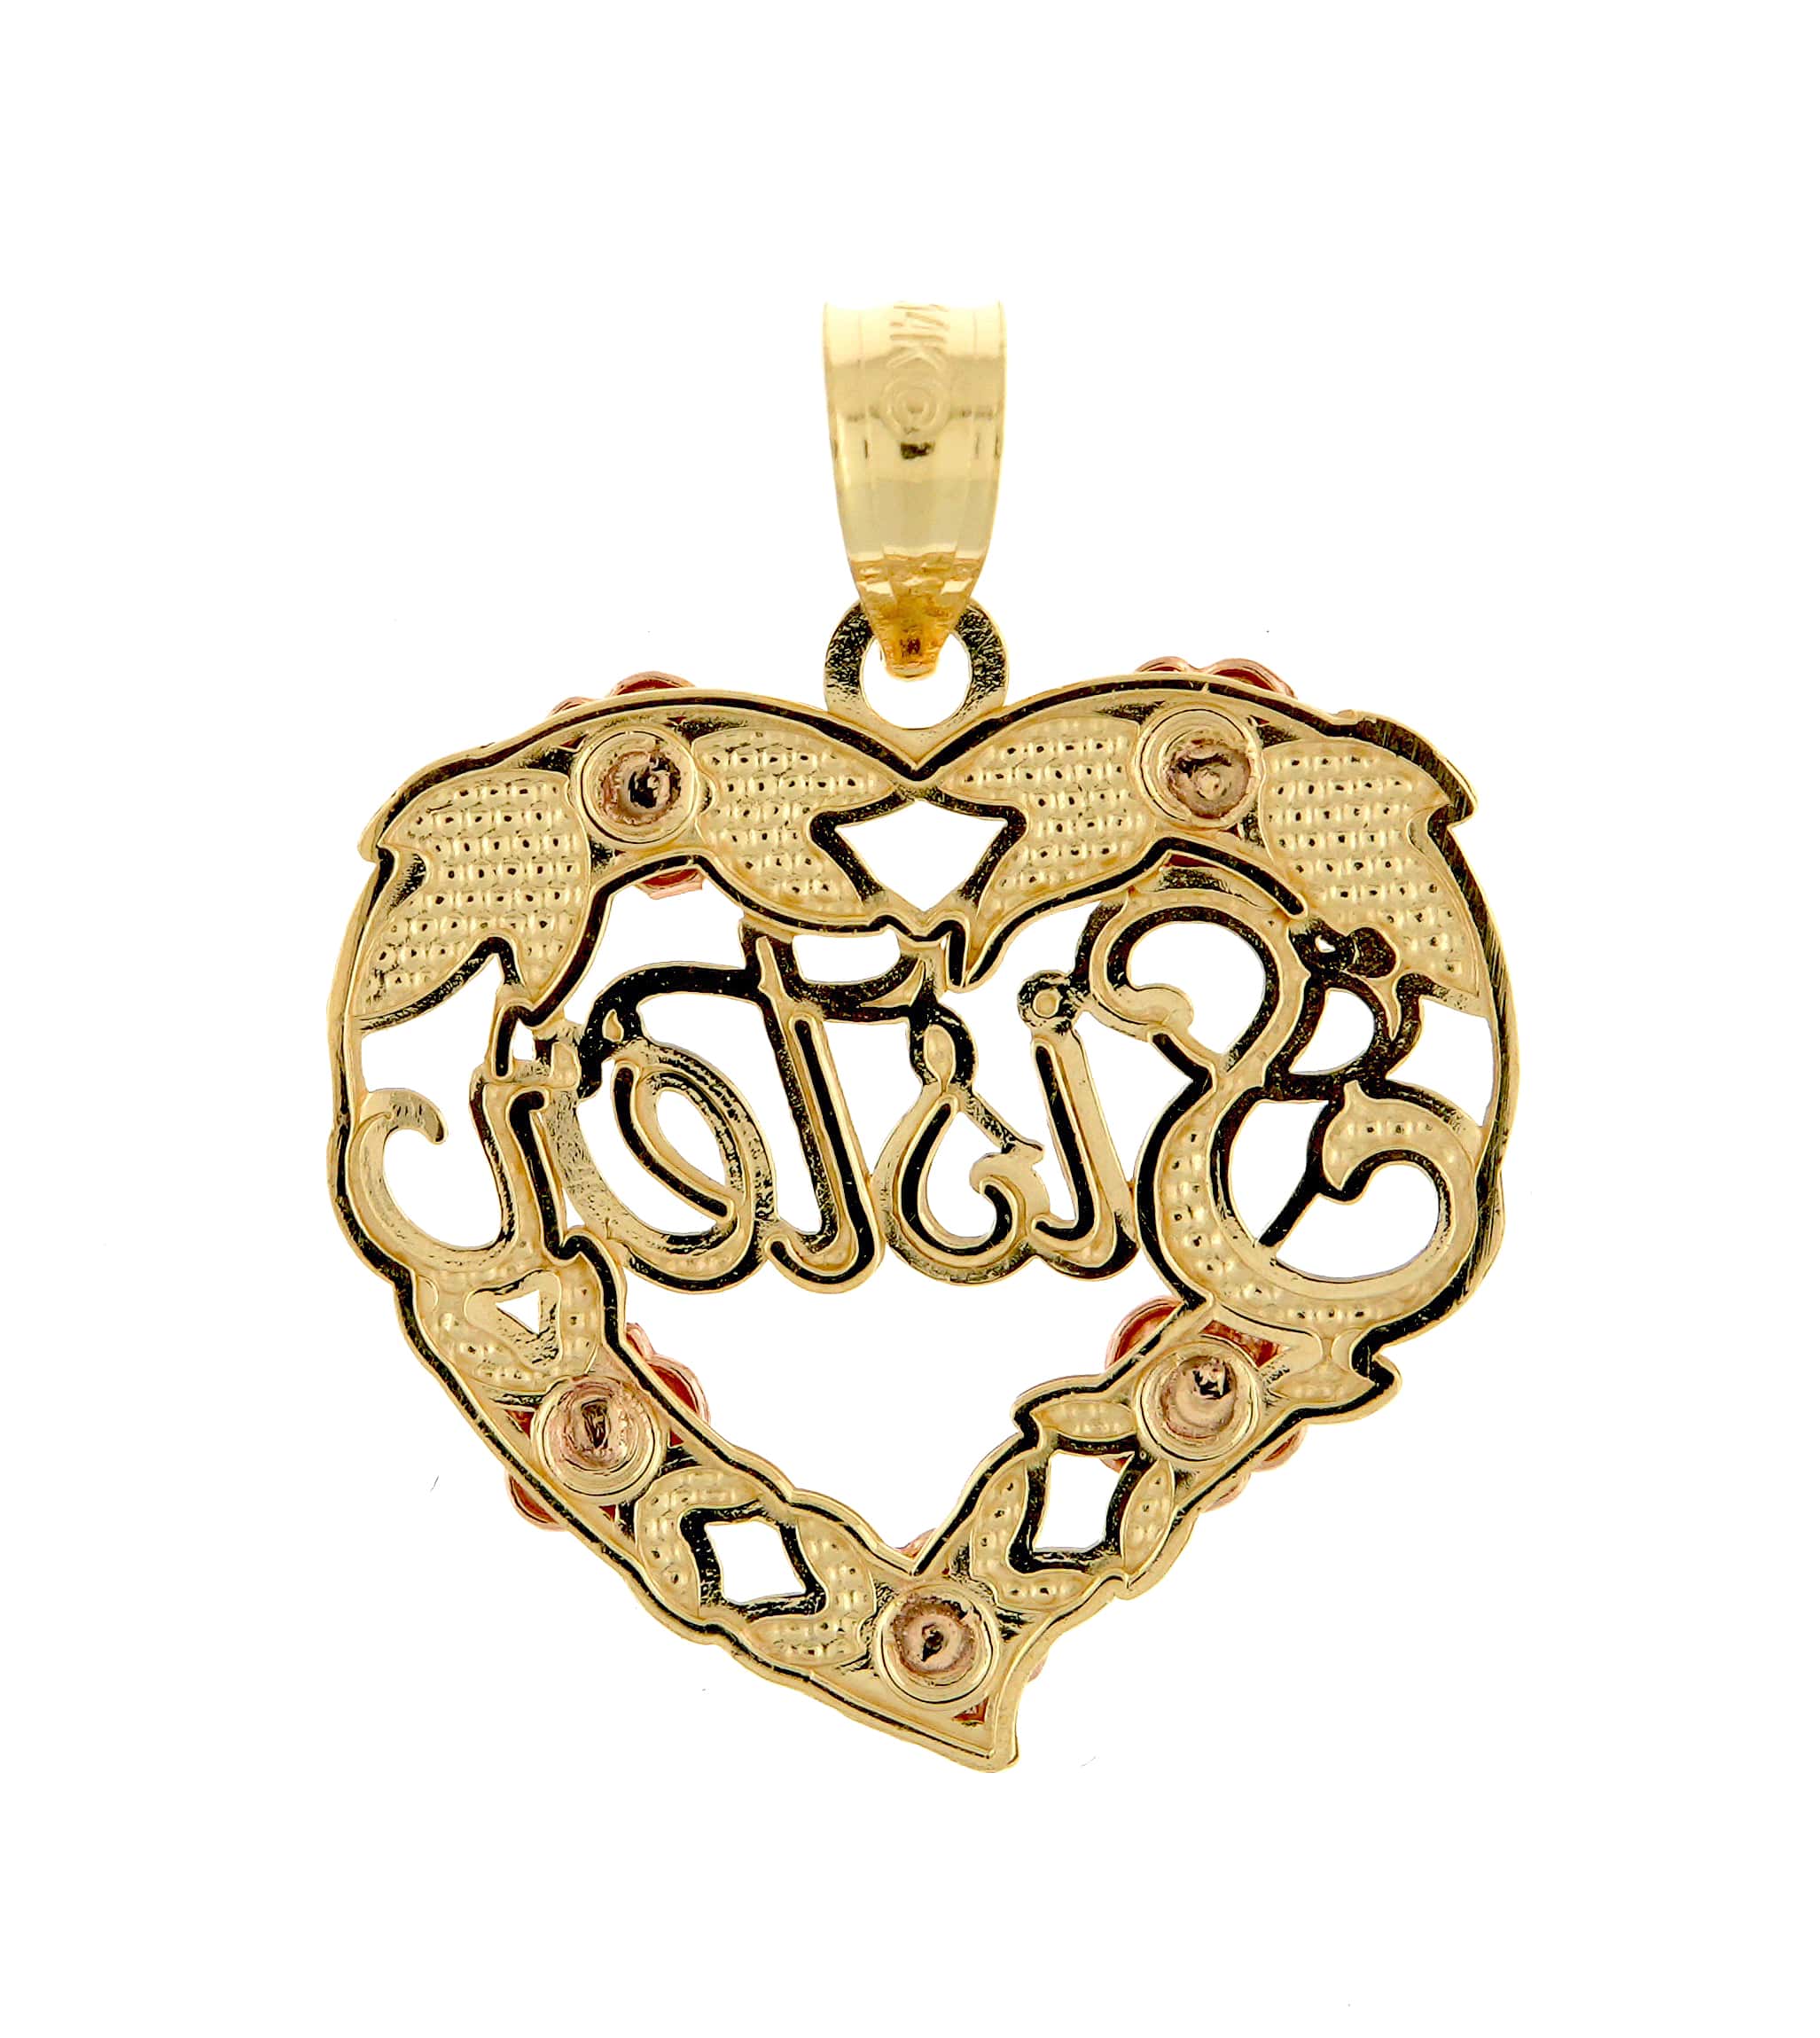 14k Yellow Rose Gold and Rhodium Sister Heart Flowers Pendant Charm